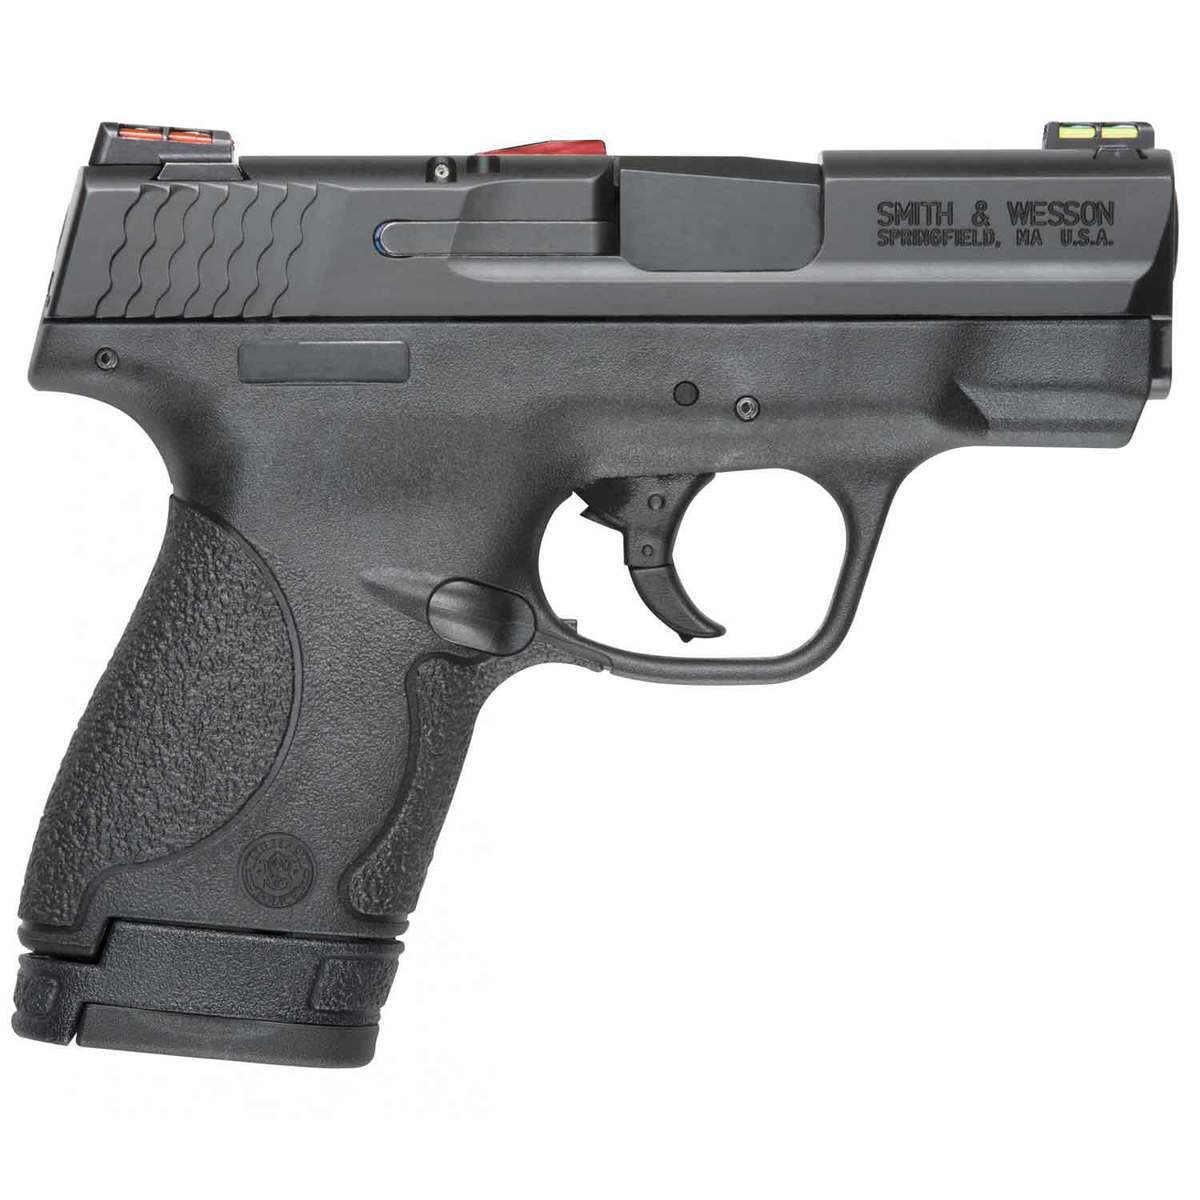 Purchasing a New Sidearm? Don't Buy a Gun until you’ve Read This Guide!